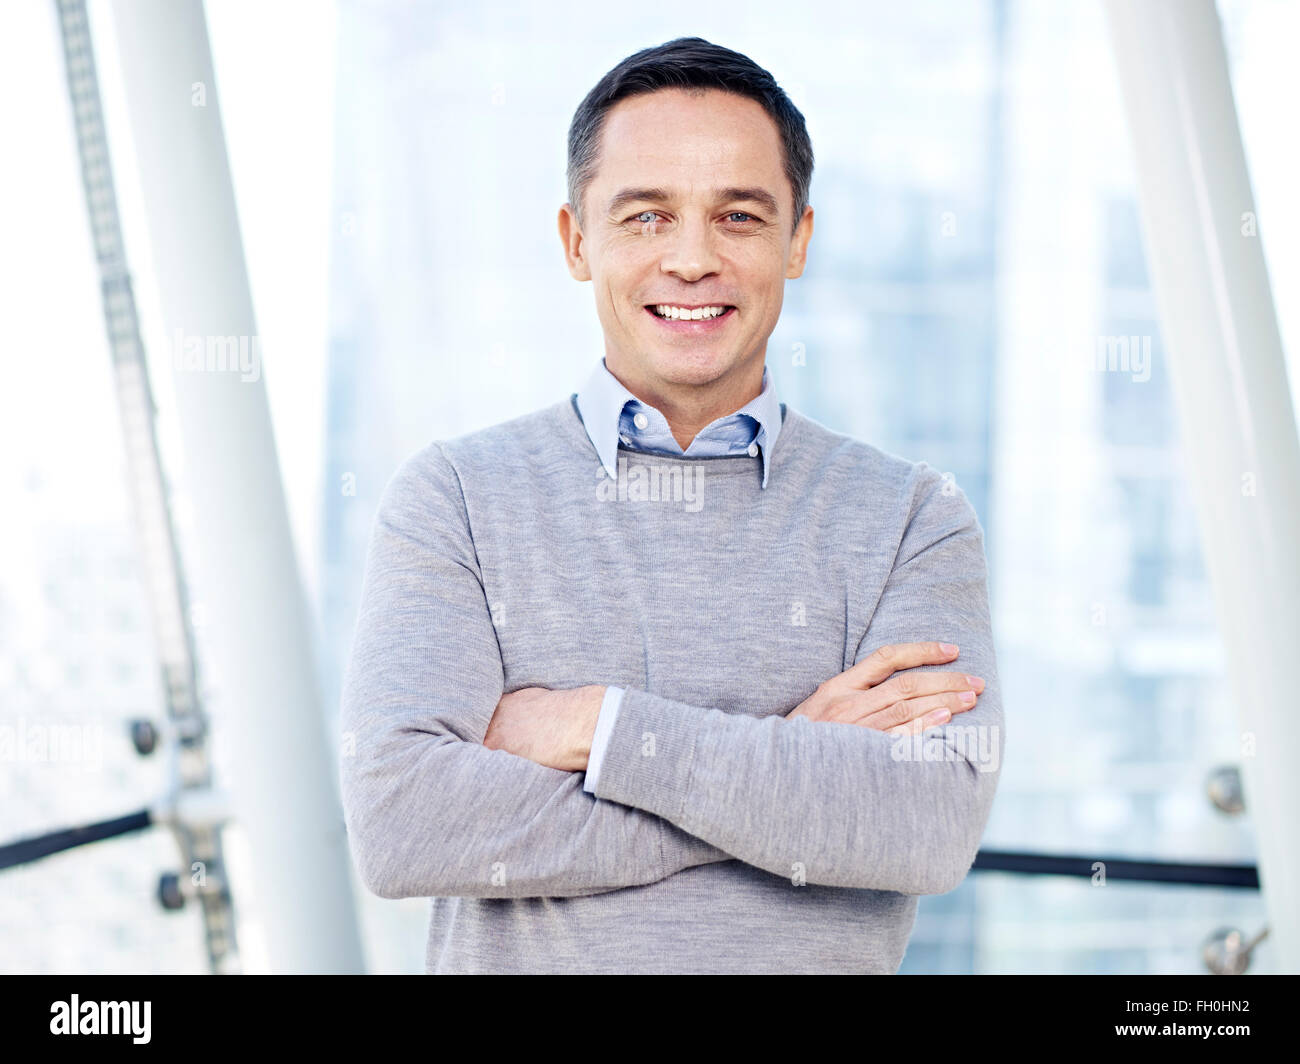 portrait of a business person in casual wear Stock Photo